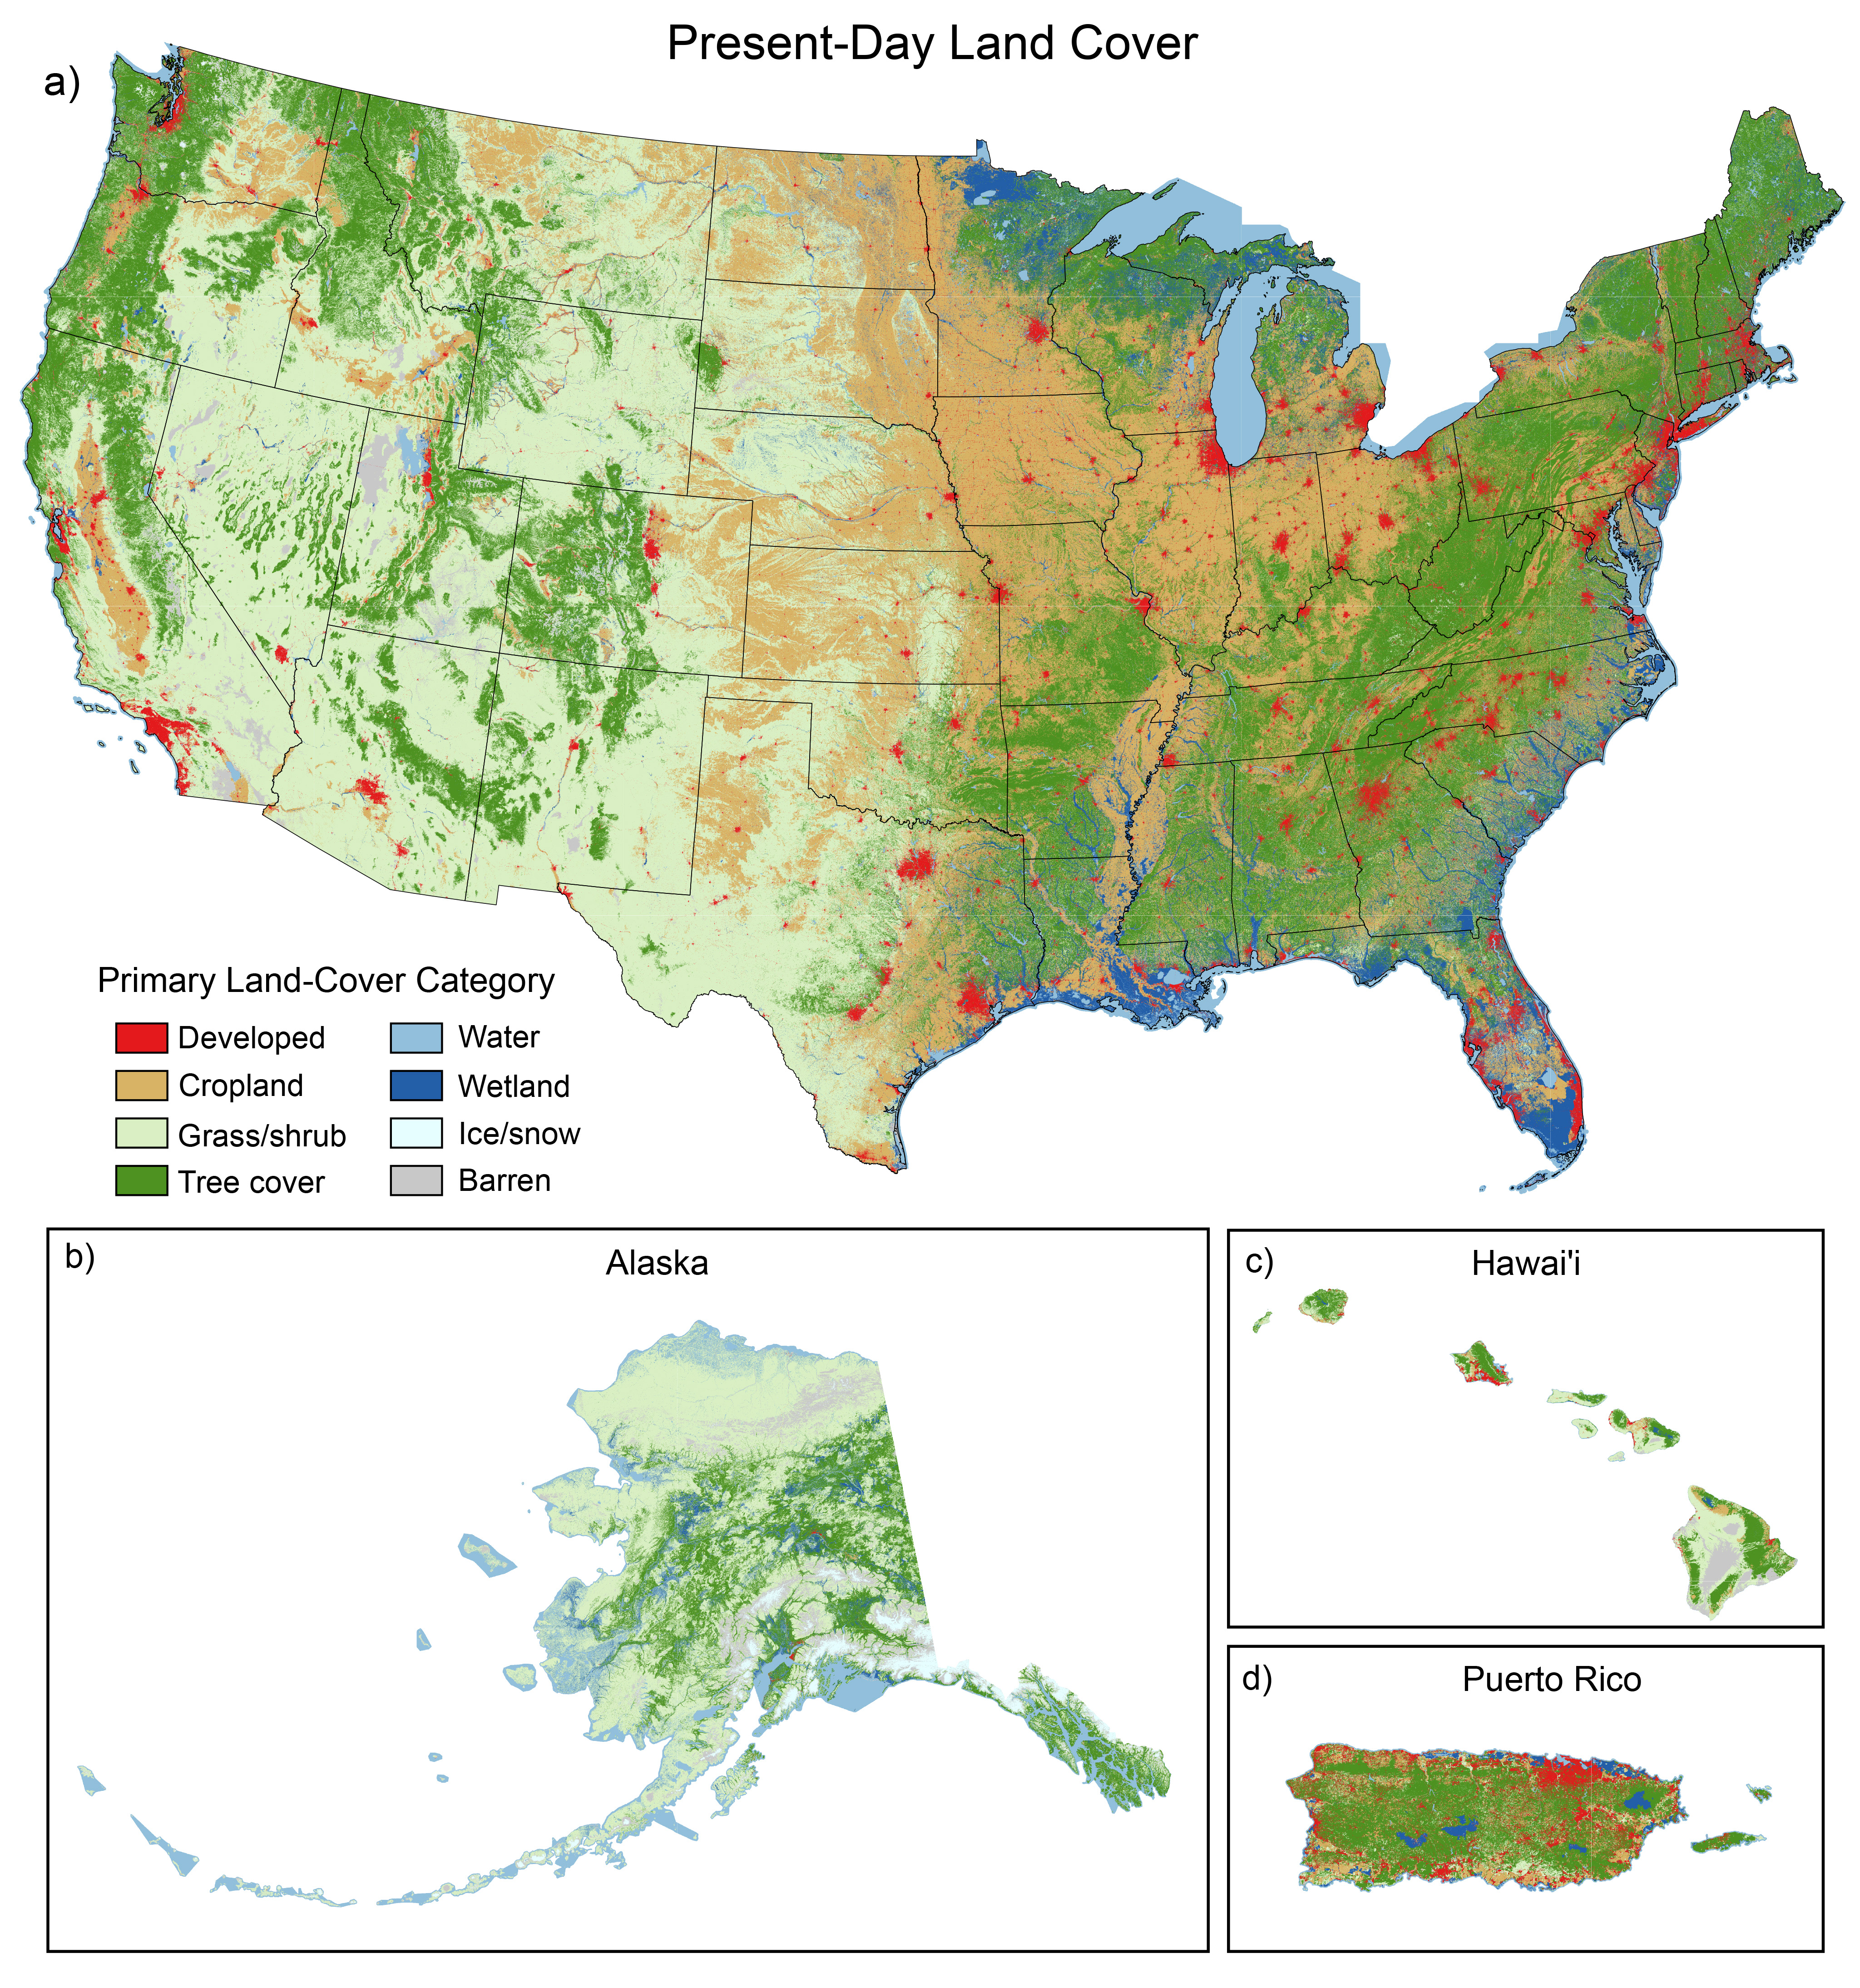 Present-Day Land Cover